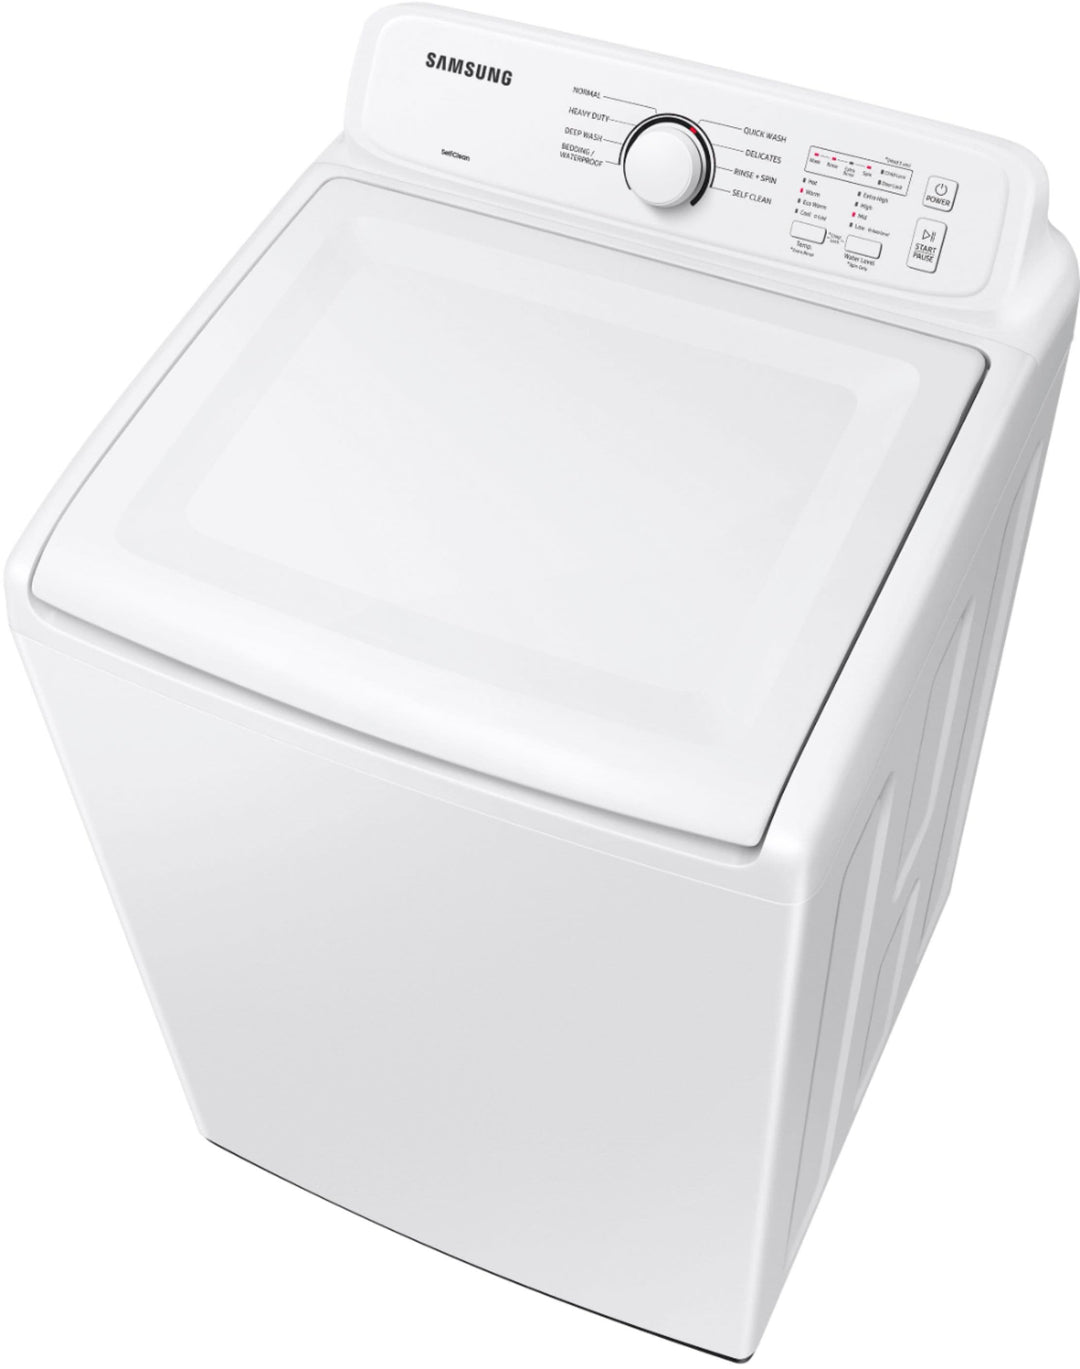 Samsung - 4.0 cu. ft. High-Efficiency Top Load Washer with ActiveWave Agitator and Soft-Close Lid - White_10